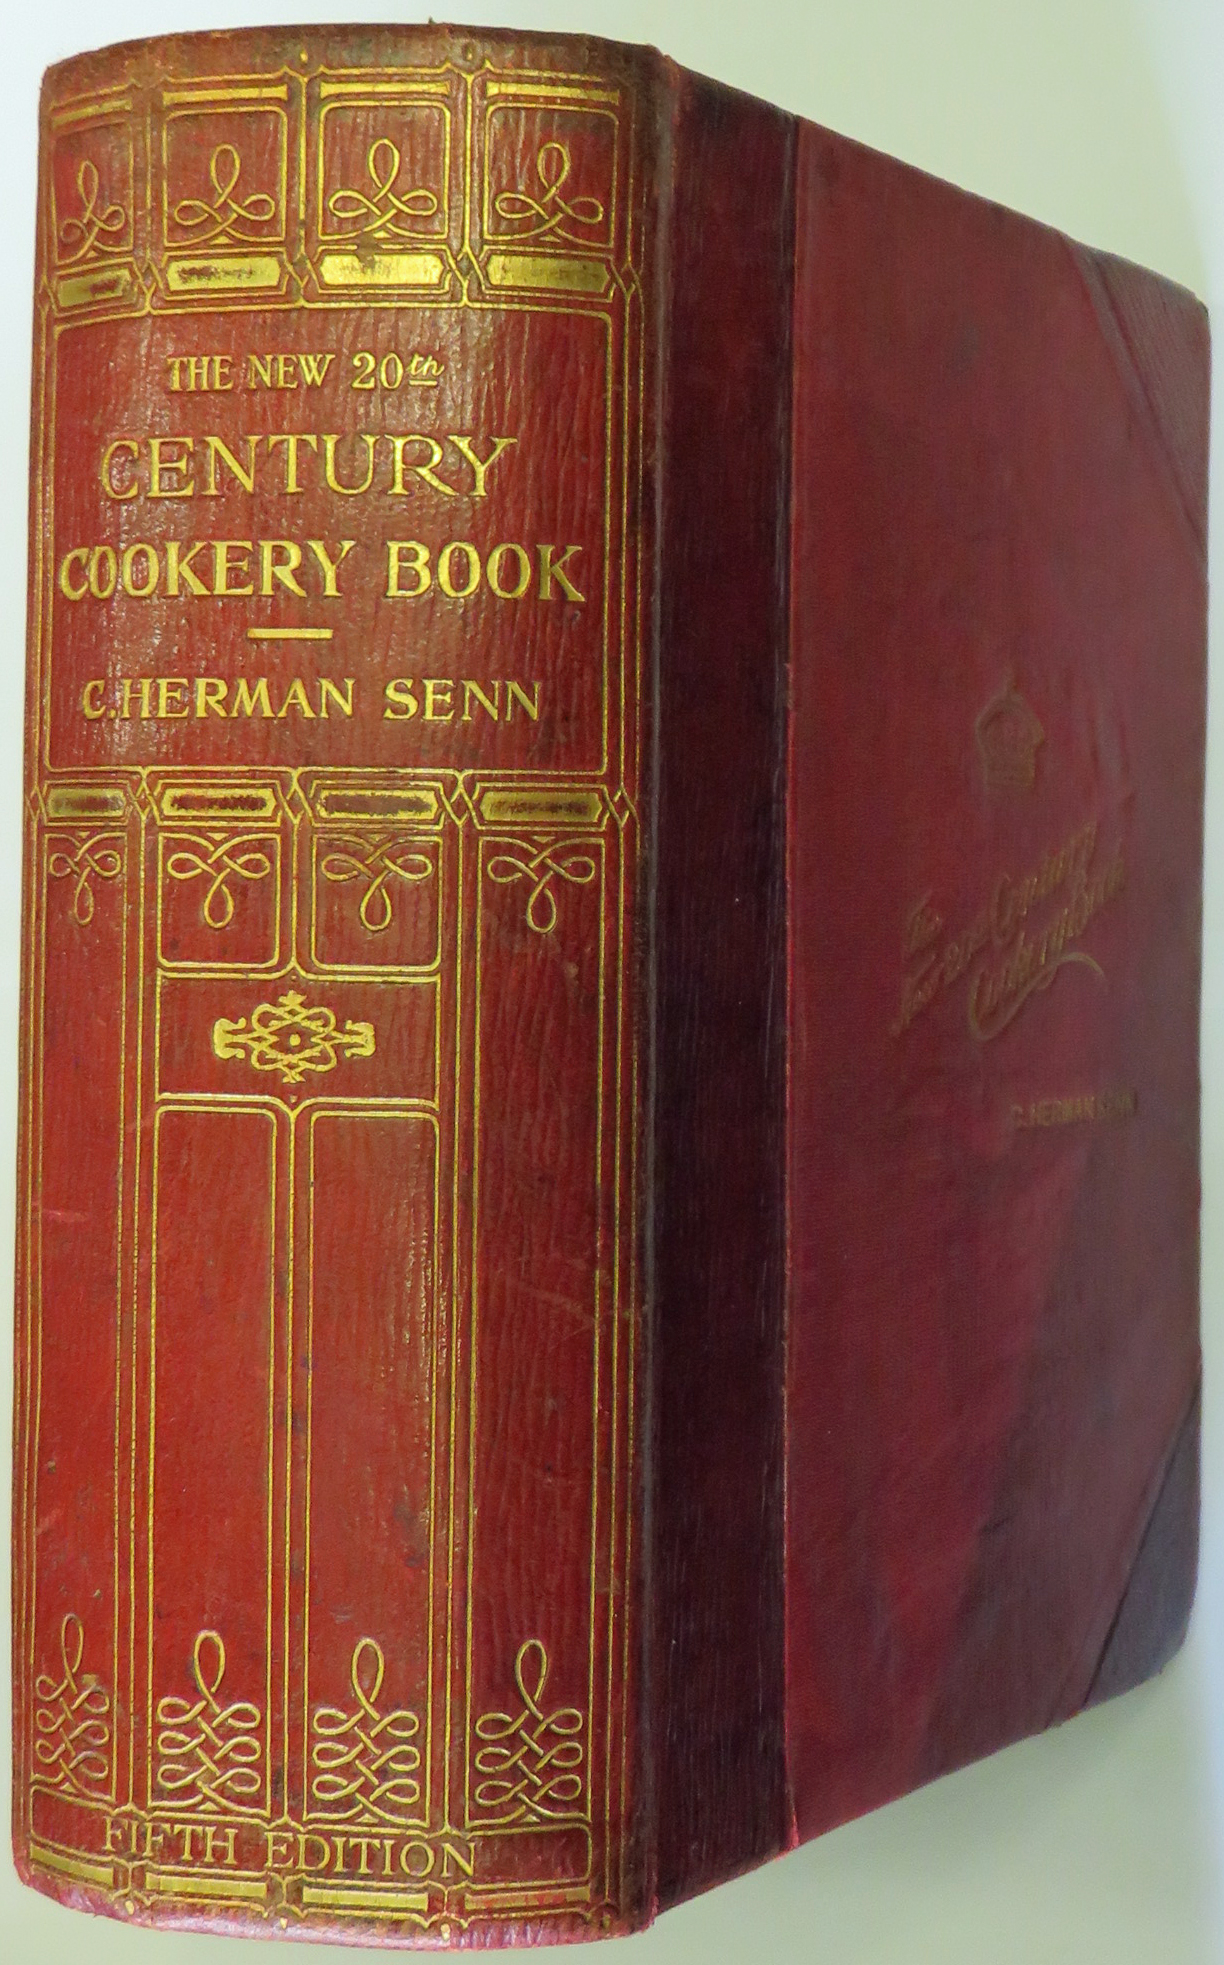 The New 20th Century Cookery Book Practical Gastronomy and Recherche Cookery